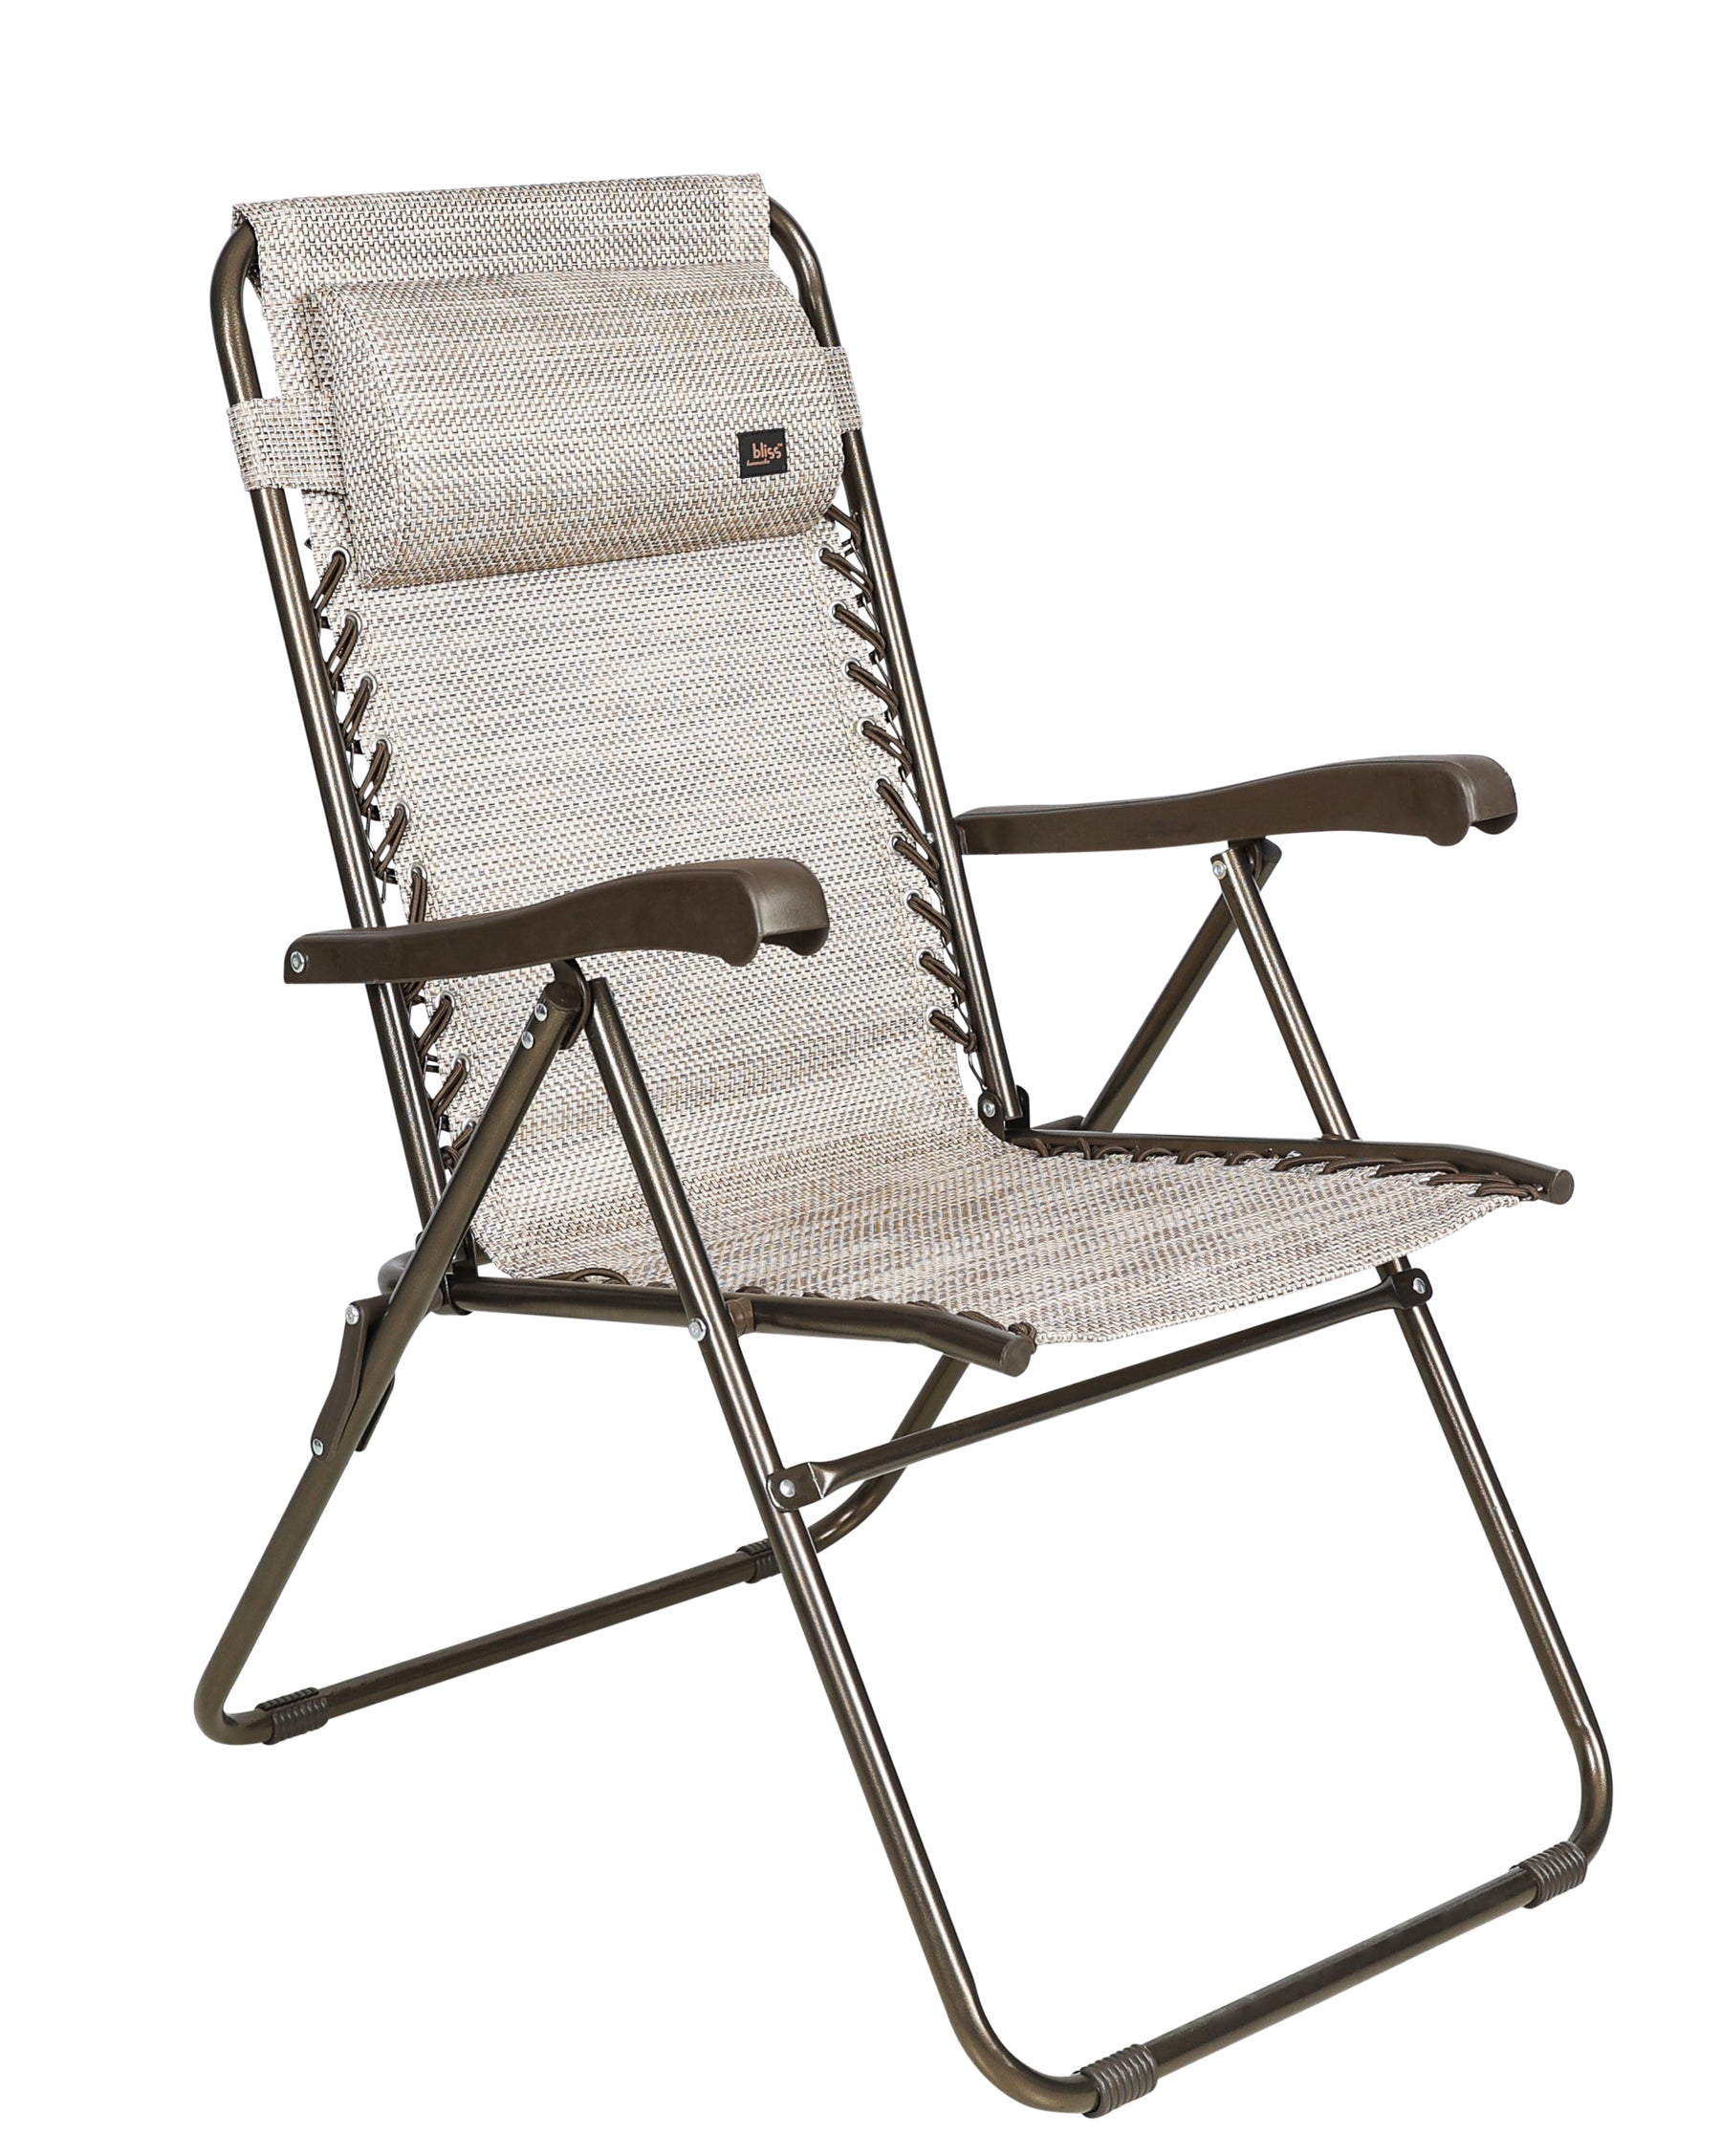 Bliss Hammocks 26-inch Wide Reclining Sling Chair with Pillow in the sand variation.